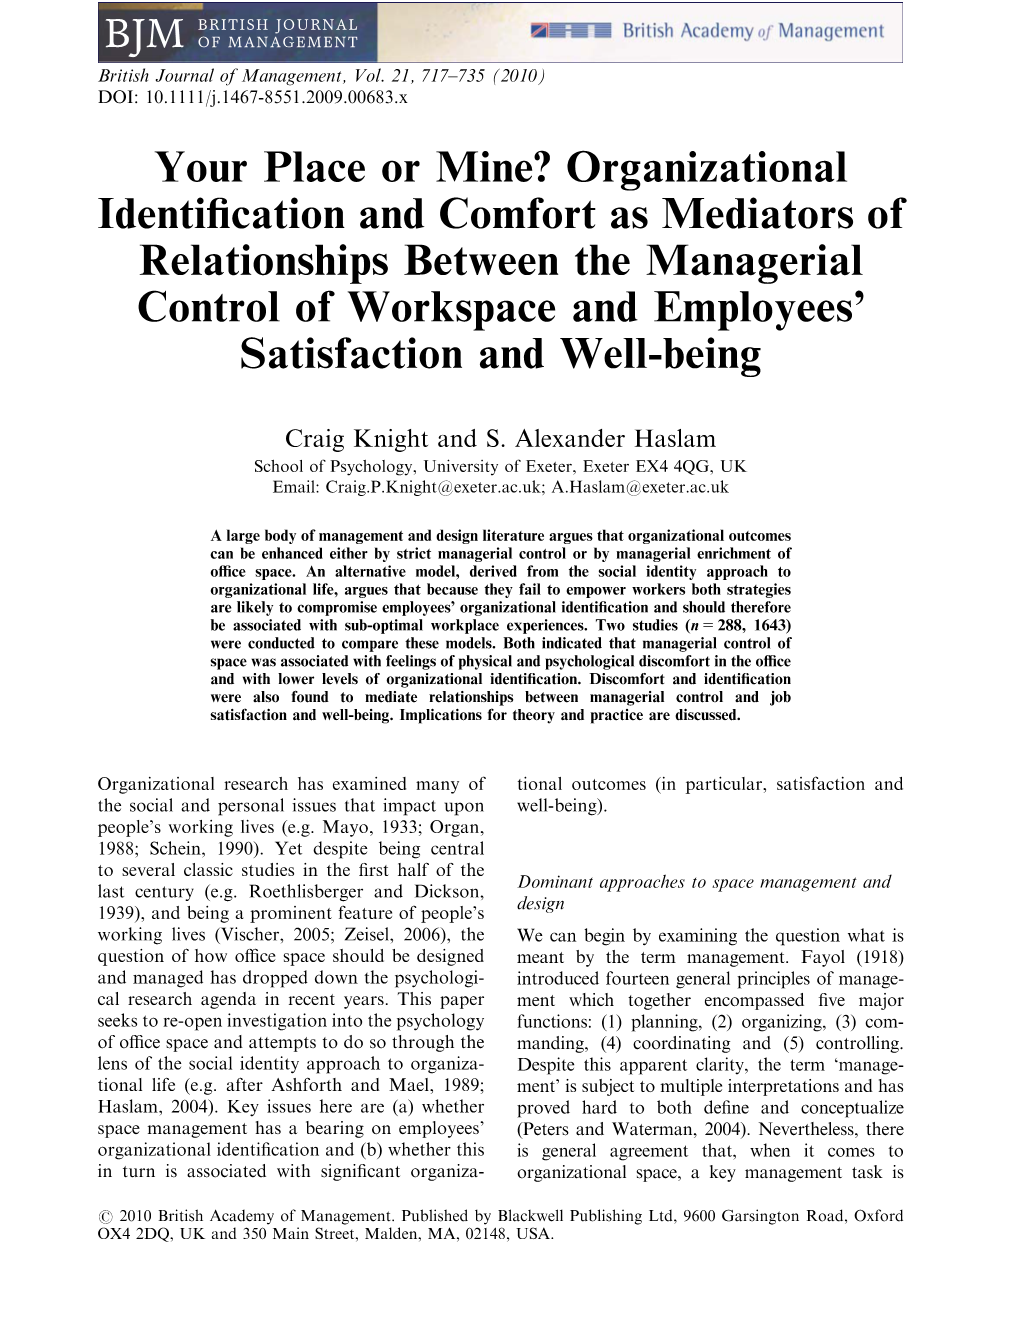 Your Place Or Mine? Organizational Identification and Comfort As Mediators of Relationships Between the Managerial Control of Wo